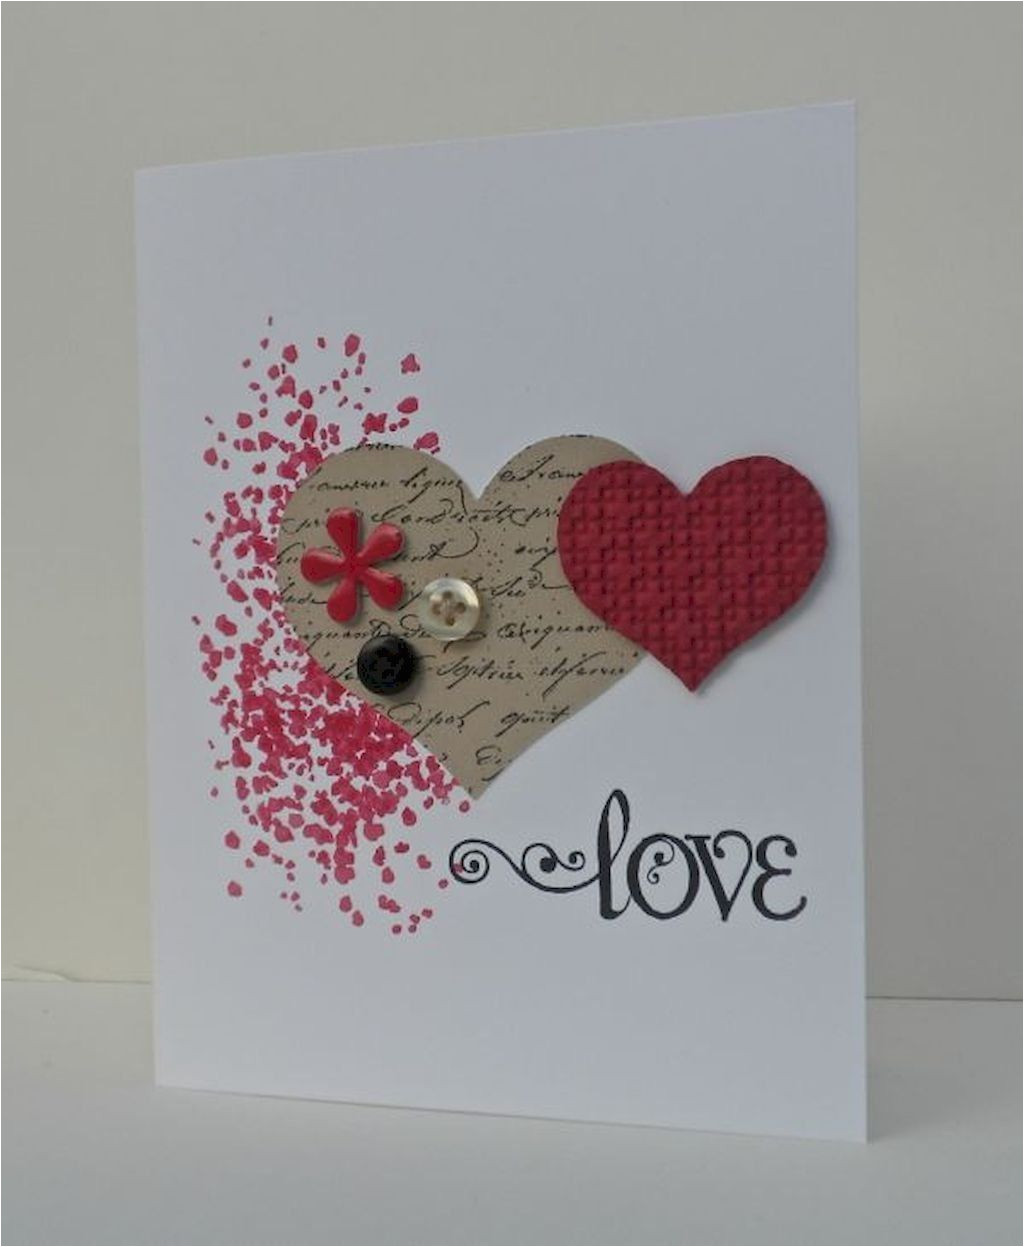 Romantic Things to Write In A Valentine Card 50 Romantic Valentines Cards Design Ideas 15 Valentine